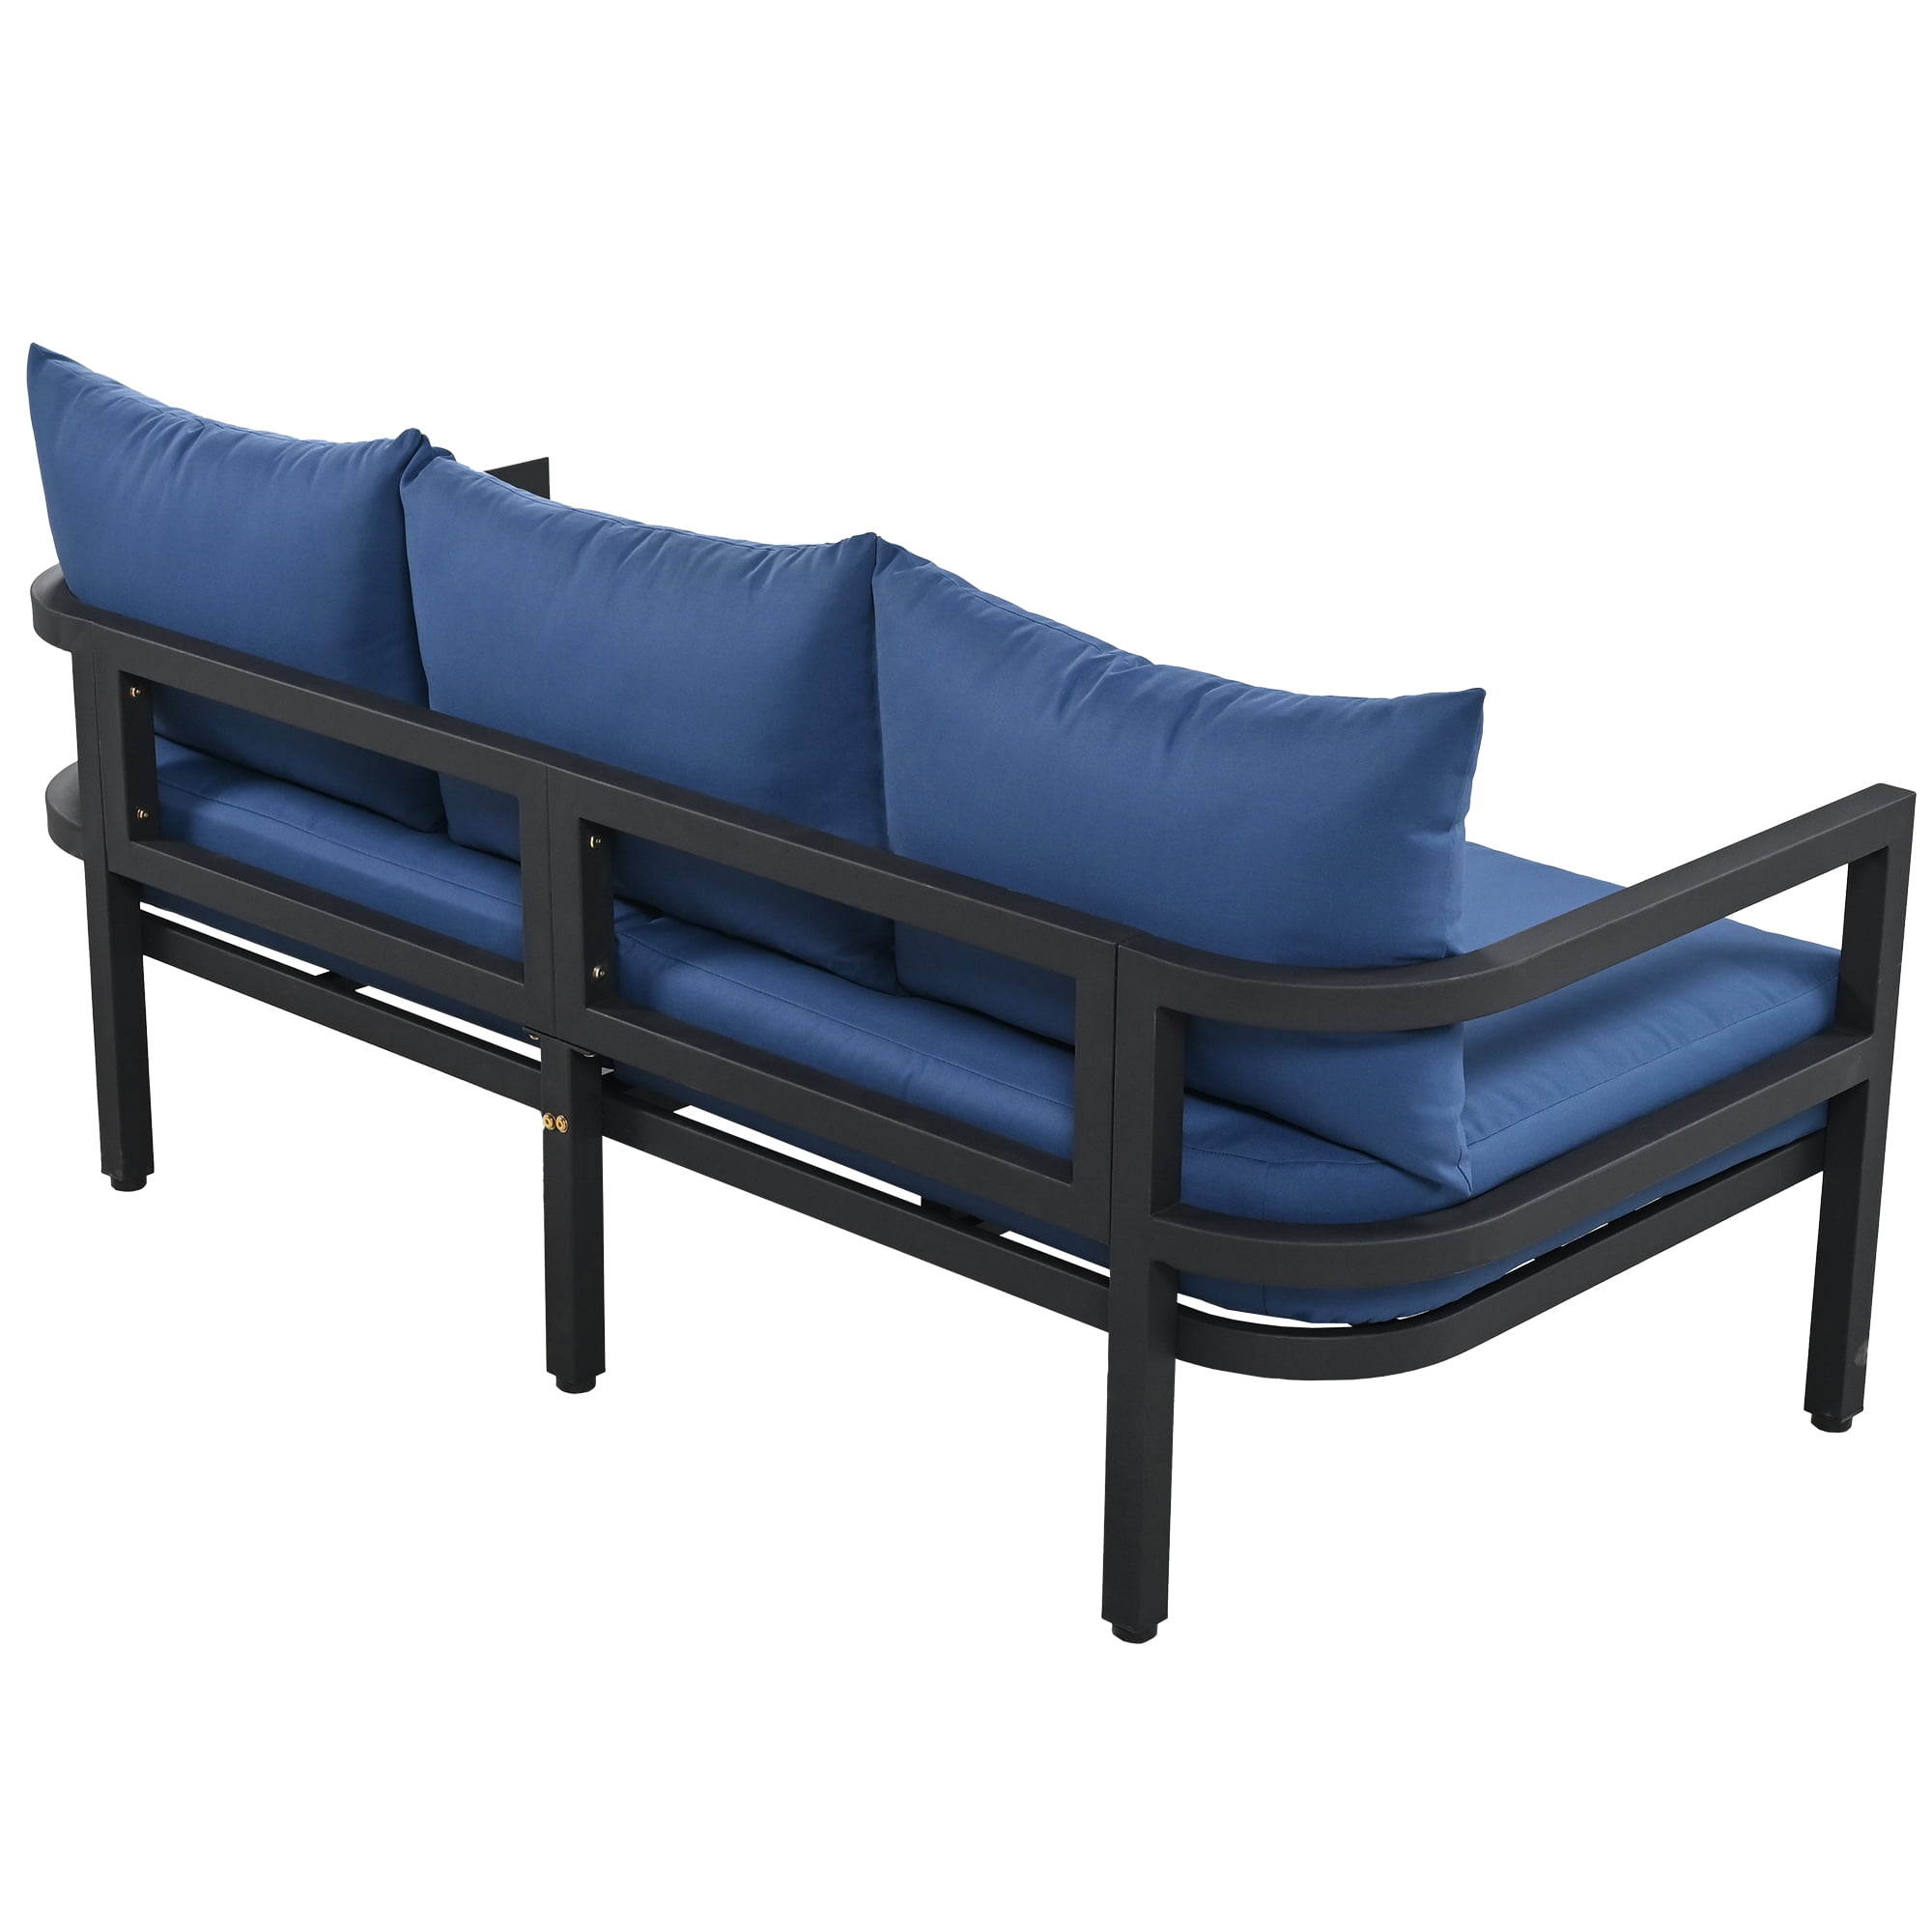 Multi-Person Outdoor Steel Sofa Set - WY000333AAC